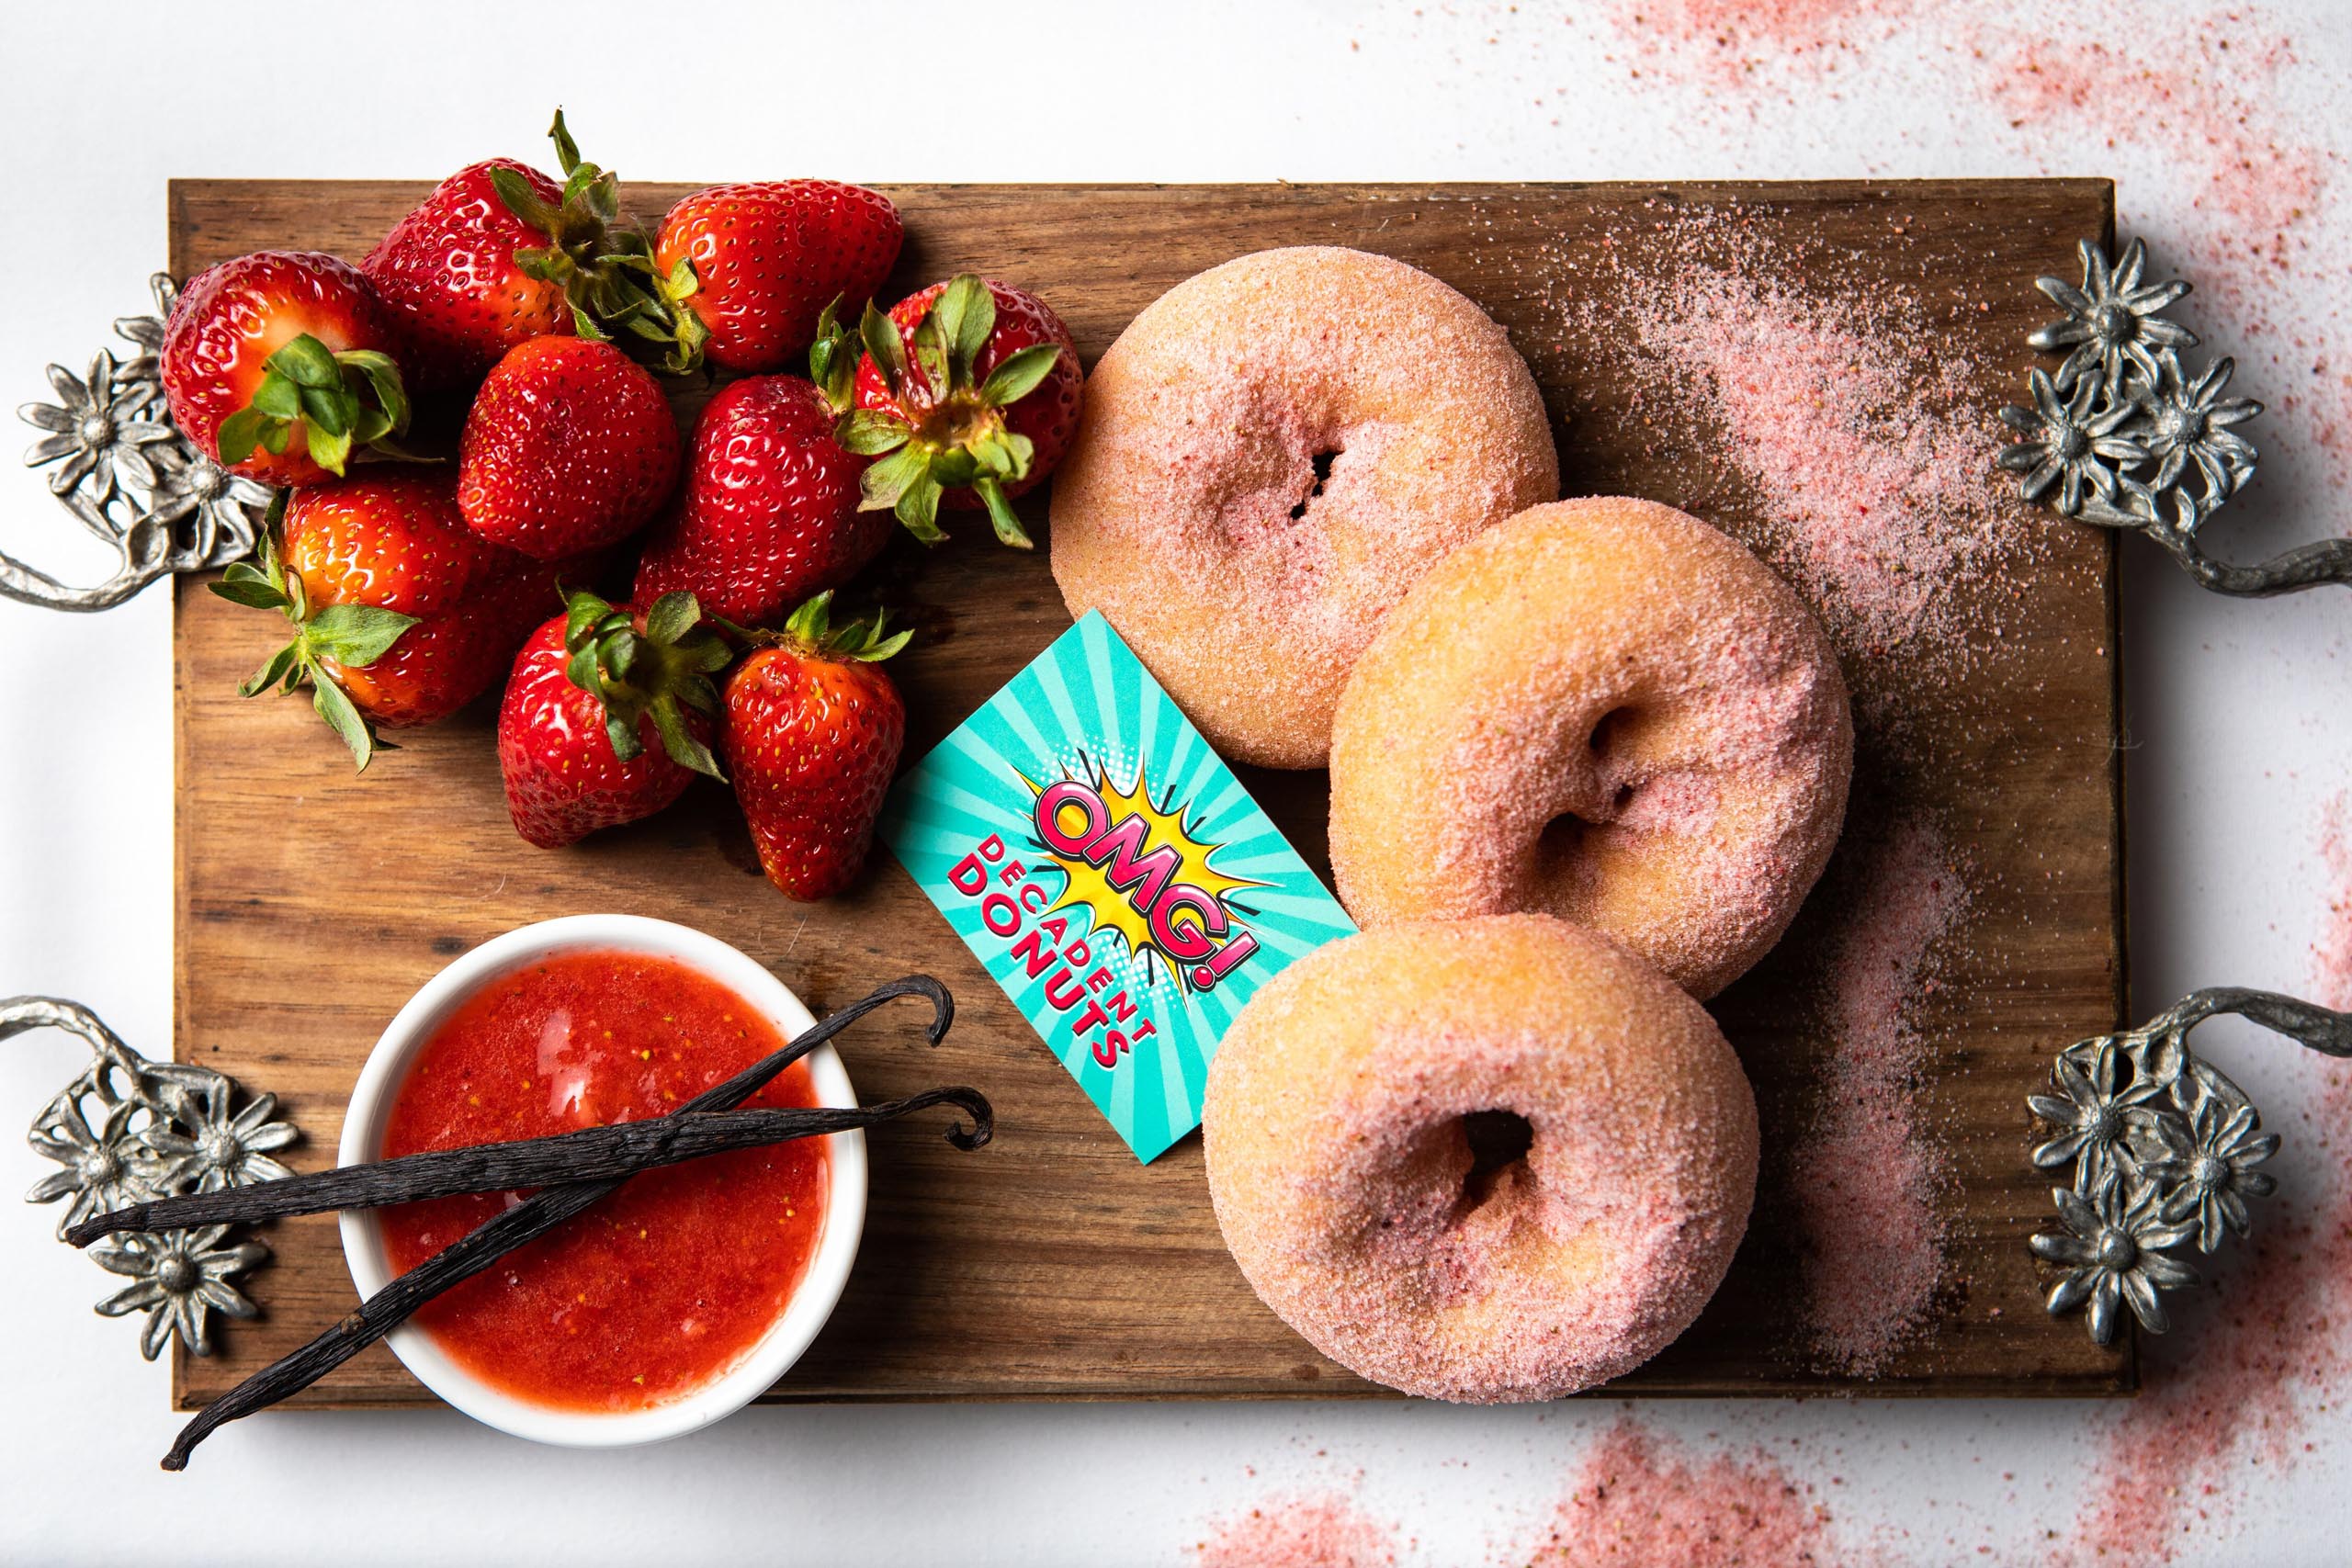 Donuts with strawberries